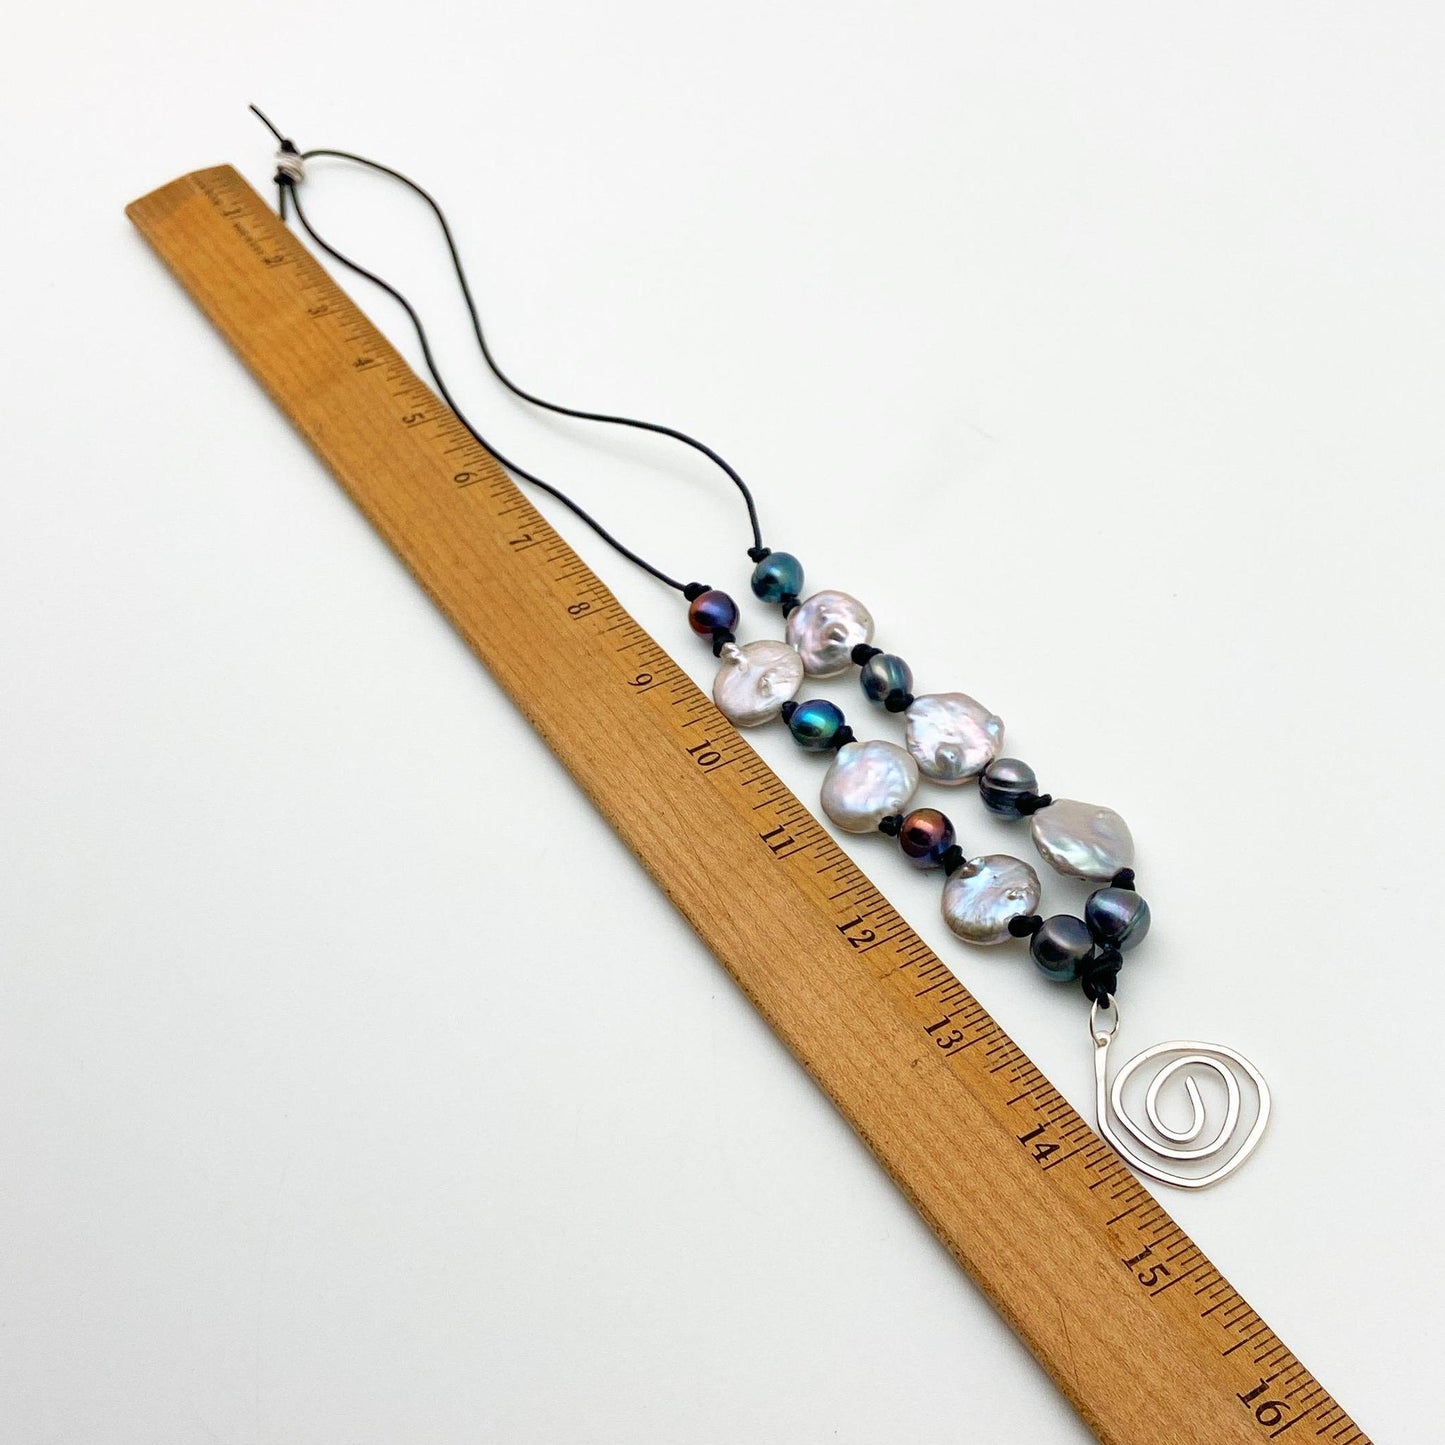 Necklace - Hand-Knotted Pearl on Leather - Sterling Swirl Pendant